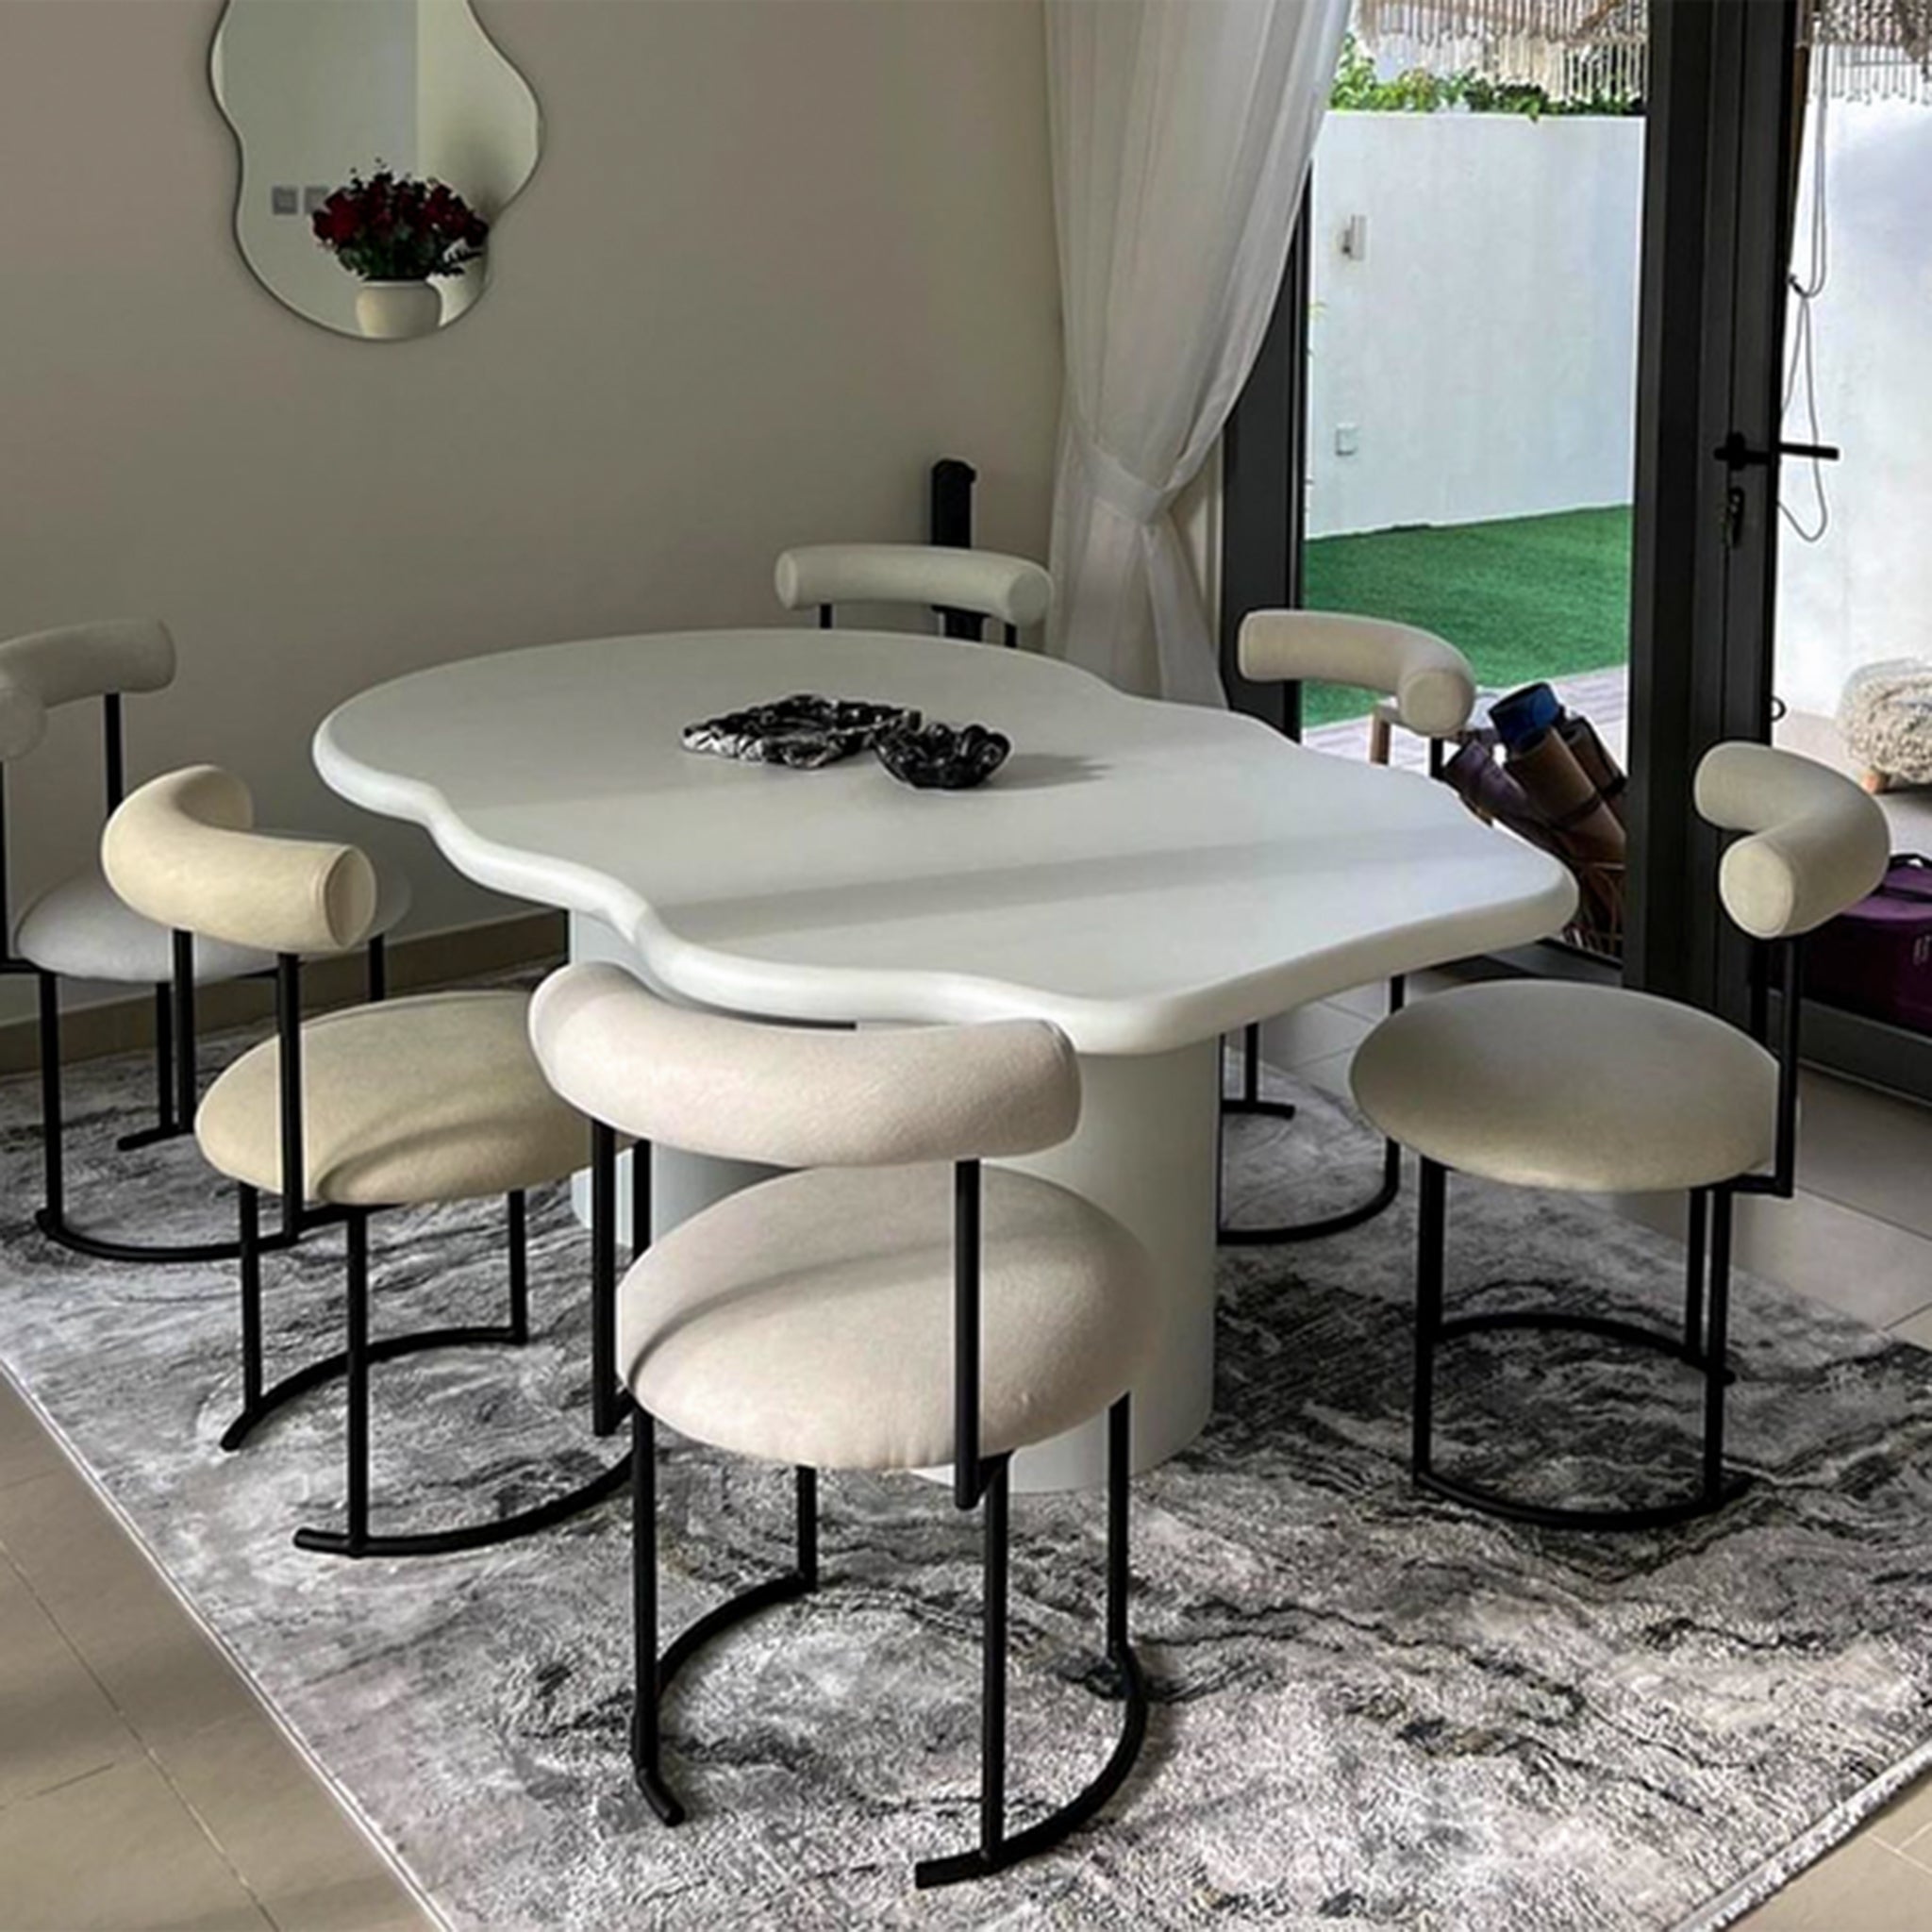 Sophisticated dining table with a curvy top supported by two cylindrical legs